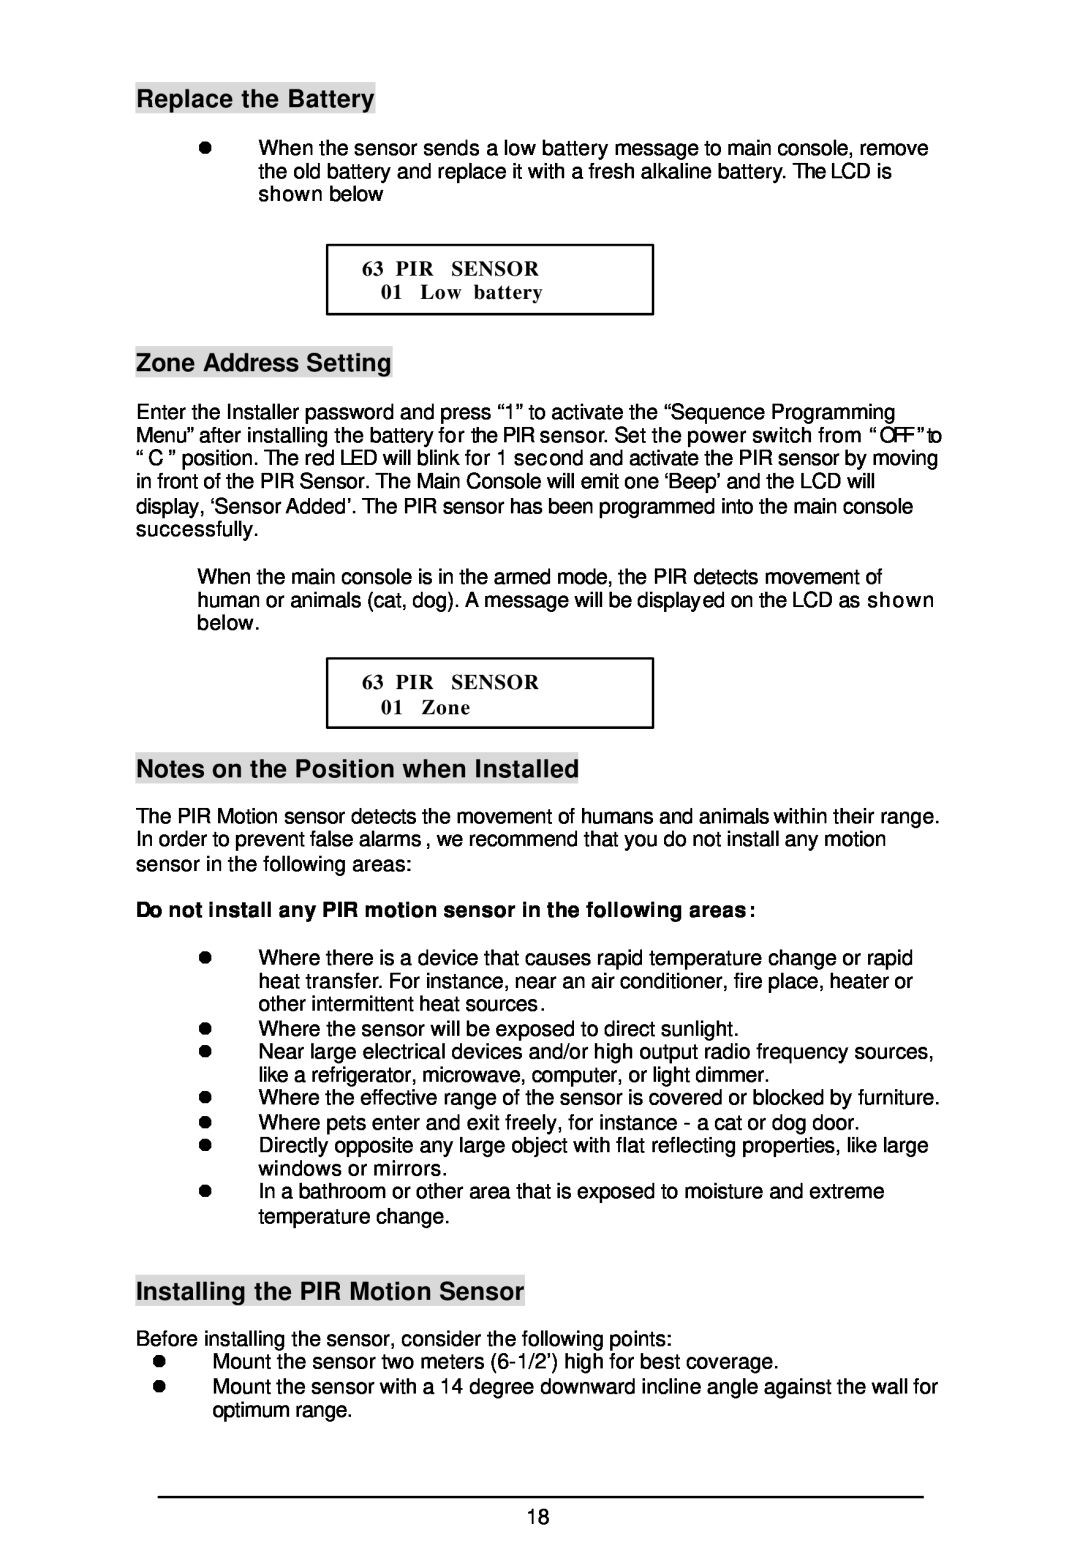 Sylvania SY4100 owner manual Replace the Battery, Notes on the Position when Installed, Installing the PIR Motion Sensor 